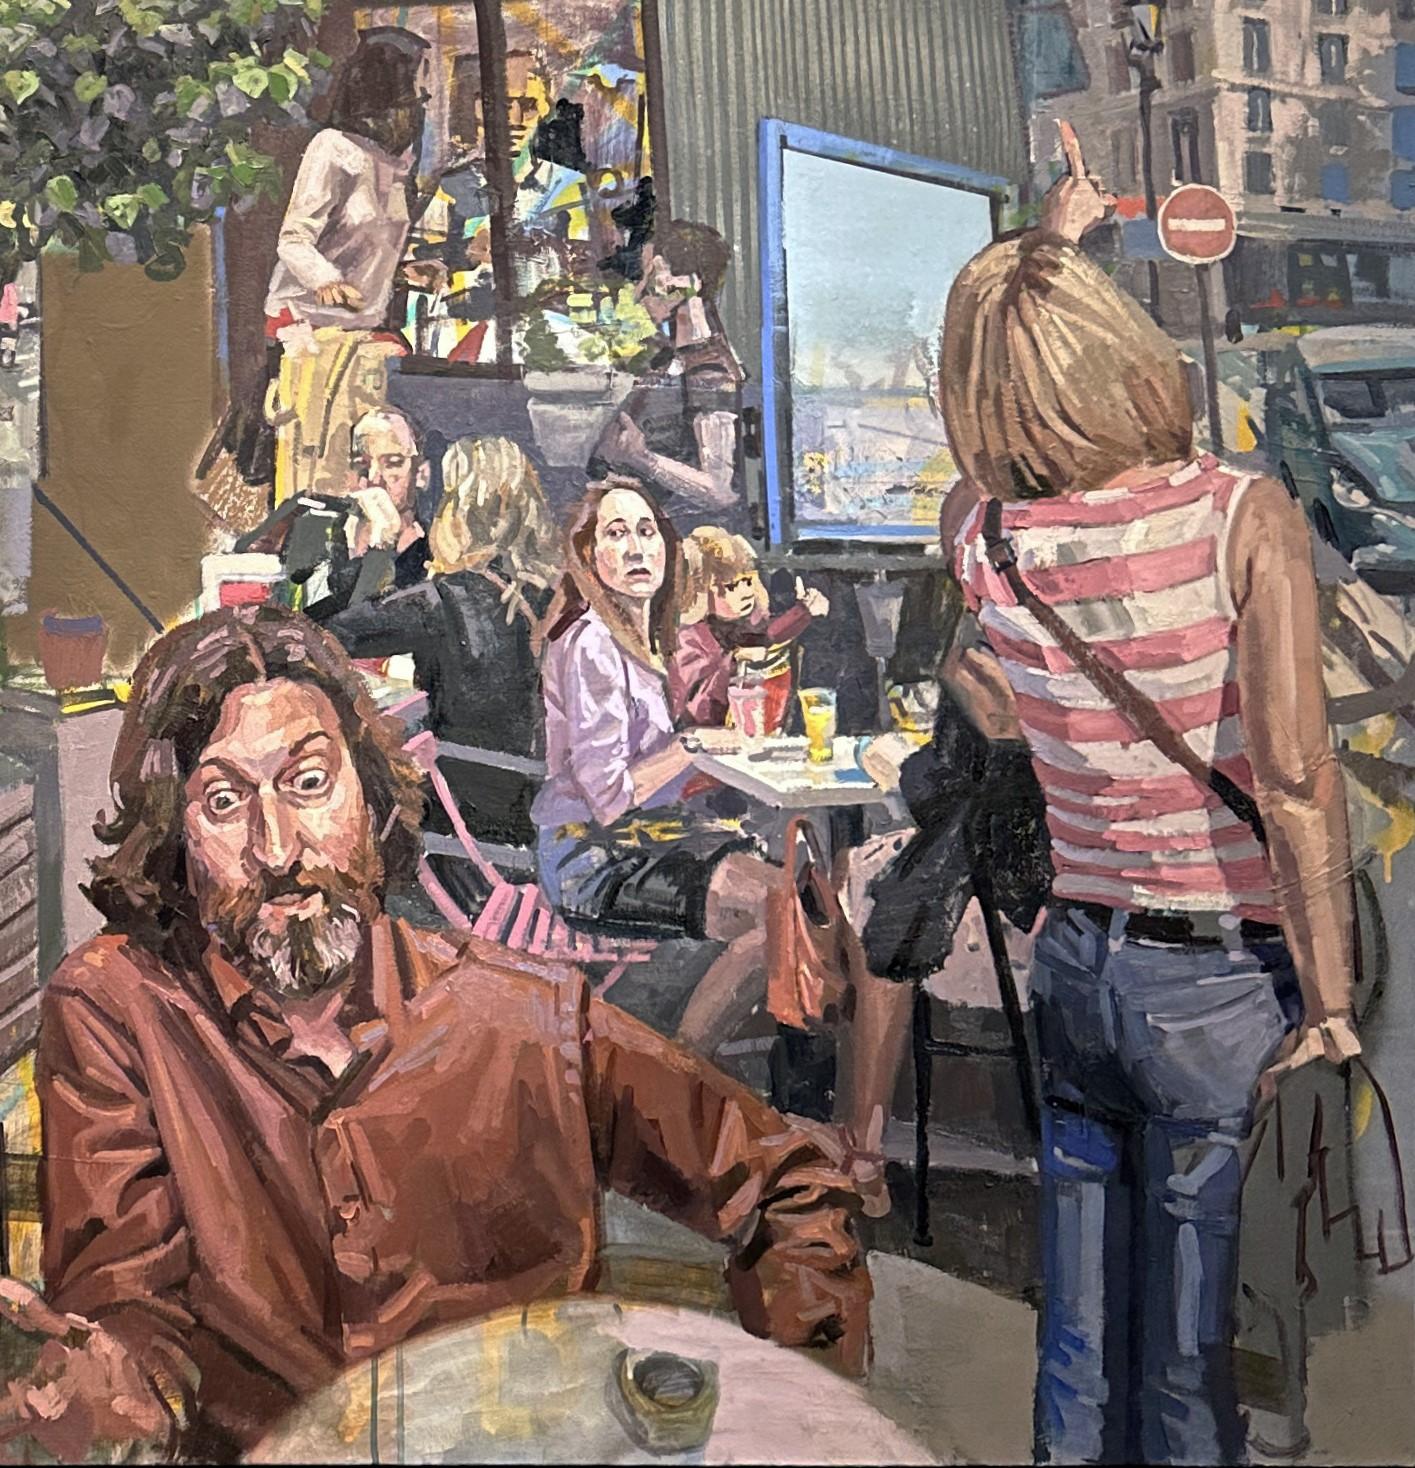 Untitled  - Surreal Chaotic Urban Café Scene, Original Oil Painting - Gray Figurative Painting by Benjamin Duke